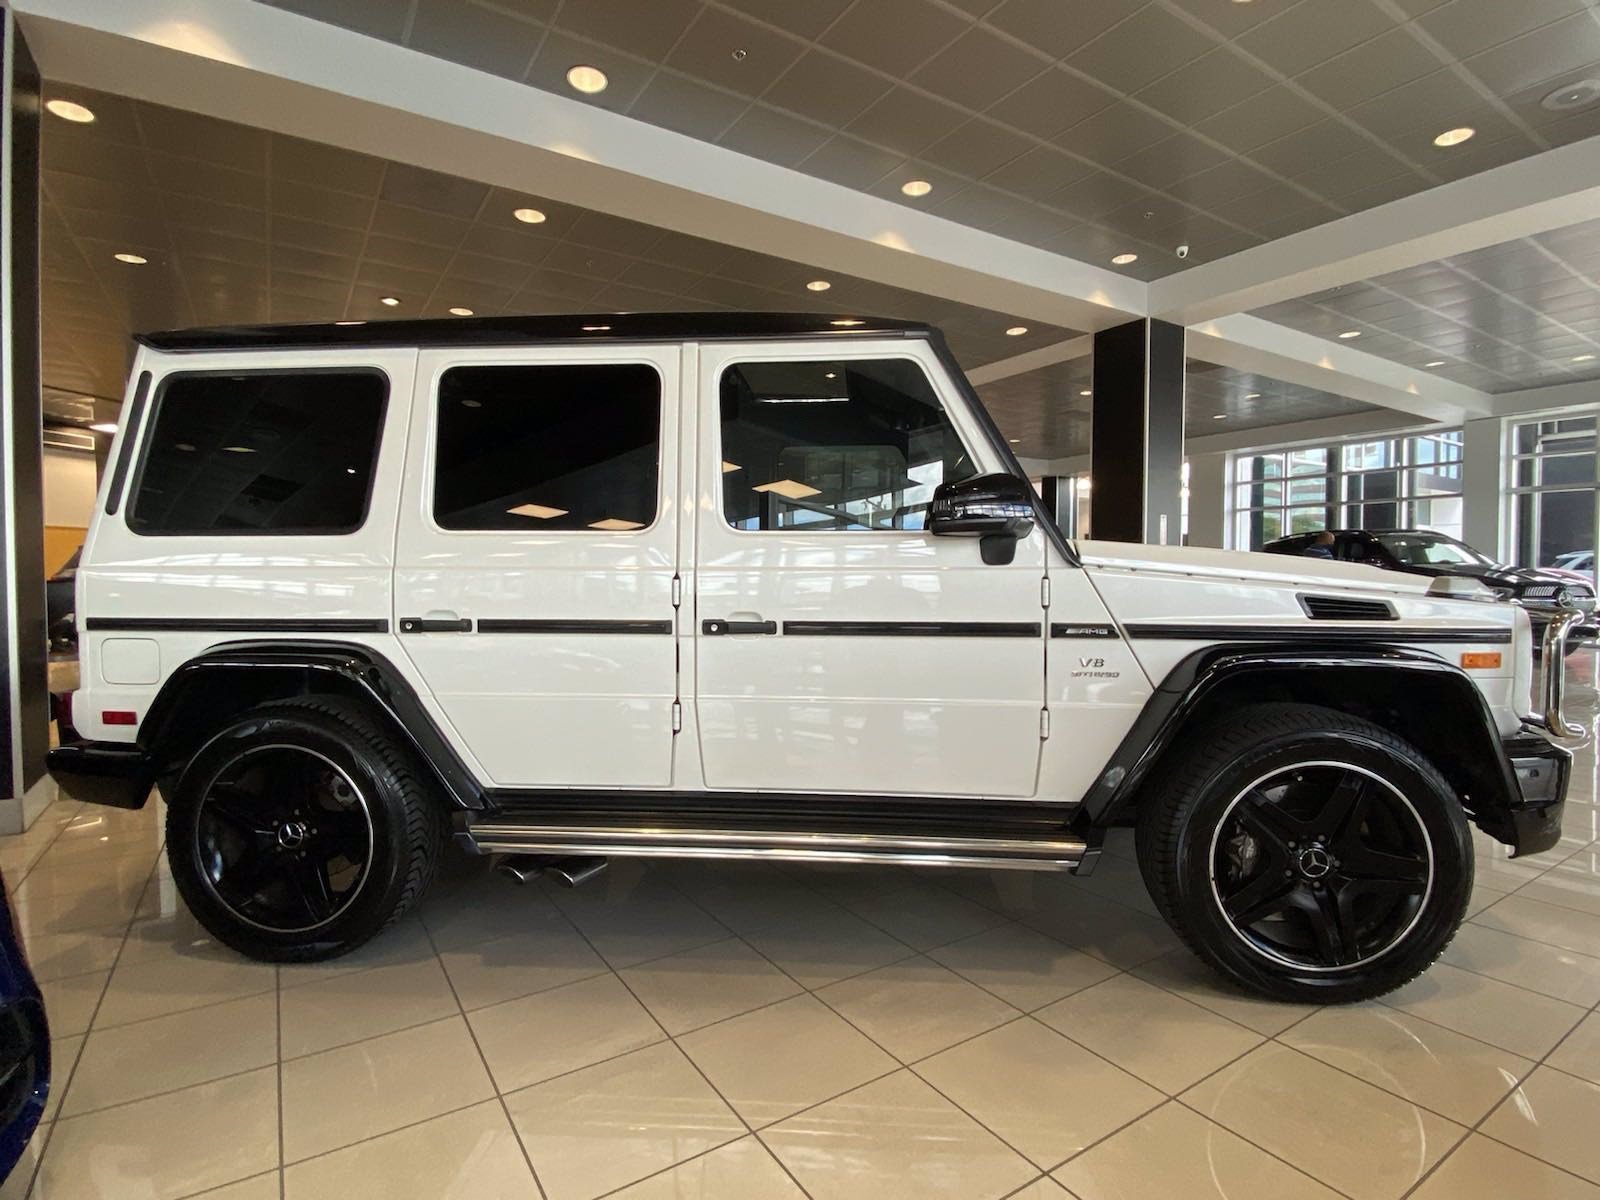 Pre Owned 17 Mercedes Benz G Class Amg G 63 Suv Awd 4matic For Sale In San Antonio Tx For 105 9